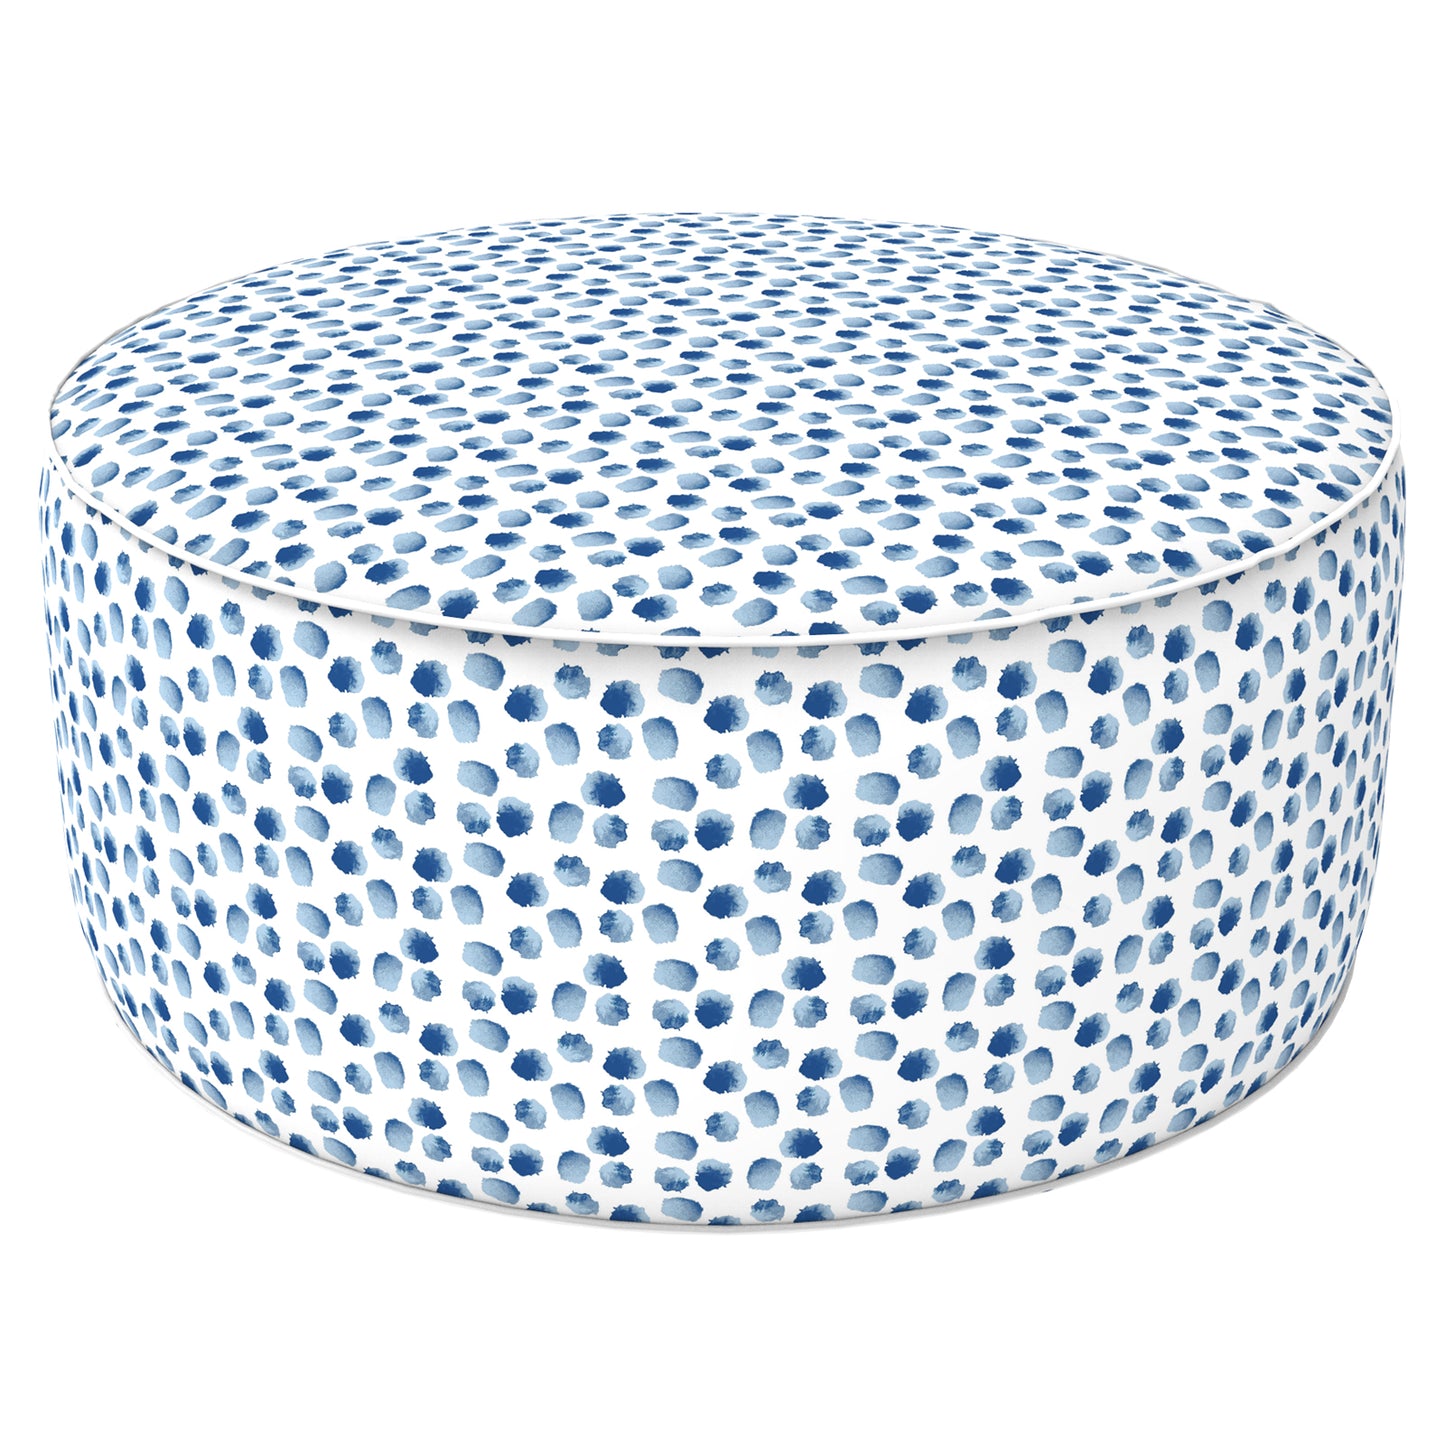 Outdoor Inflatable Stool Ottoman, All Weather Portable Footrest Stool, Furniture Stool Ottomans for Home Garden Beach, D31”xH14”, Brush Blue